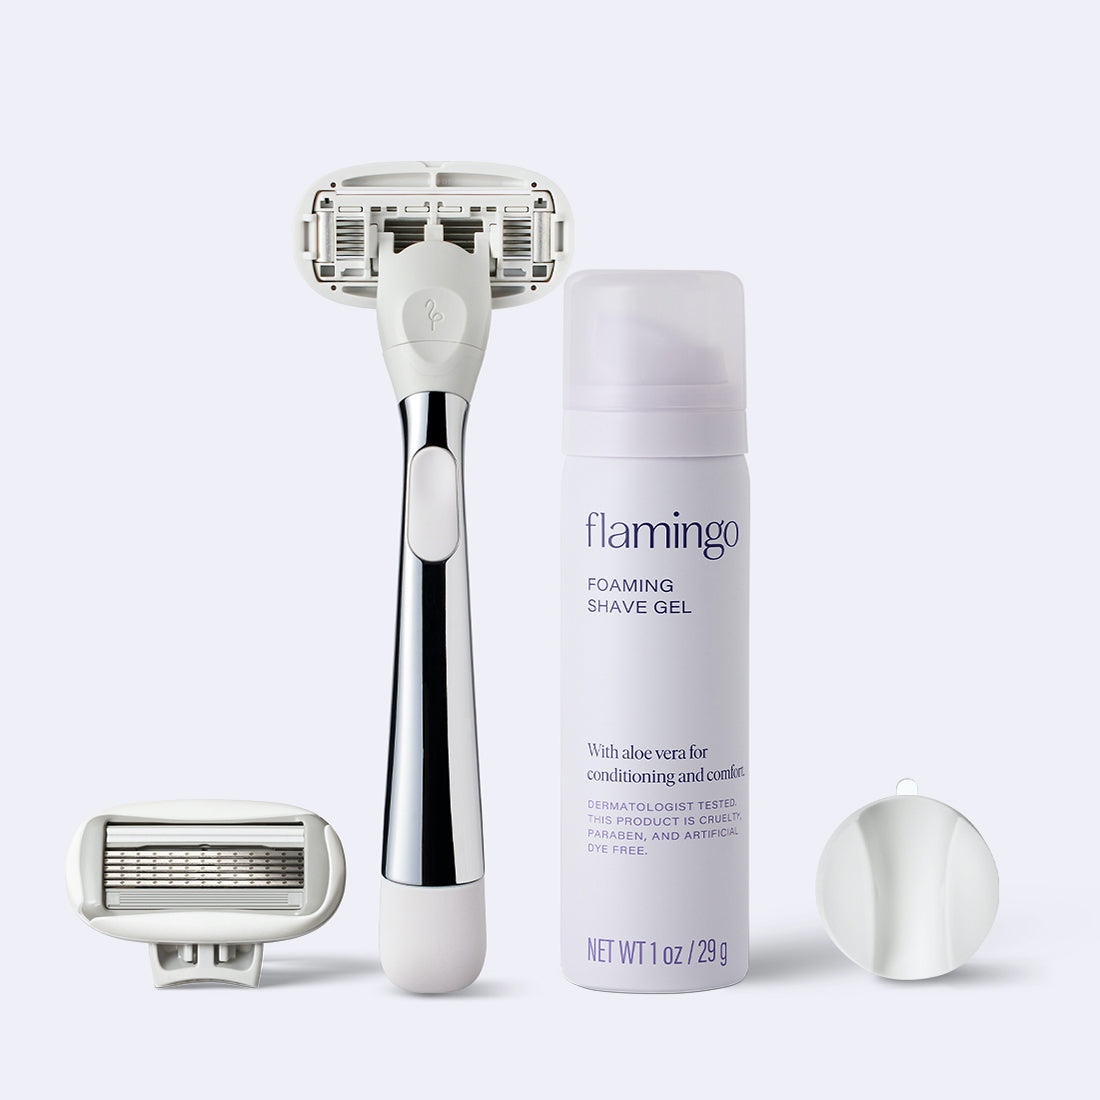 Flamingo Starter Set in the color Polished Chrome, featuring a razor, shower holder, extra blade, and mini 1oz foaming shave gel